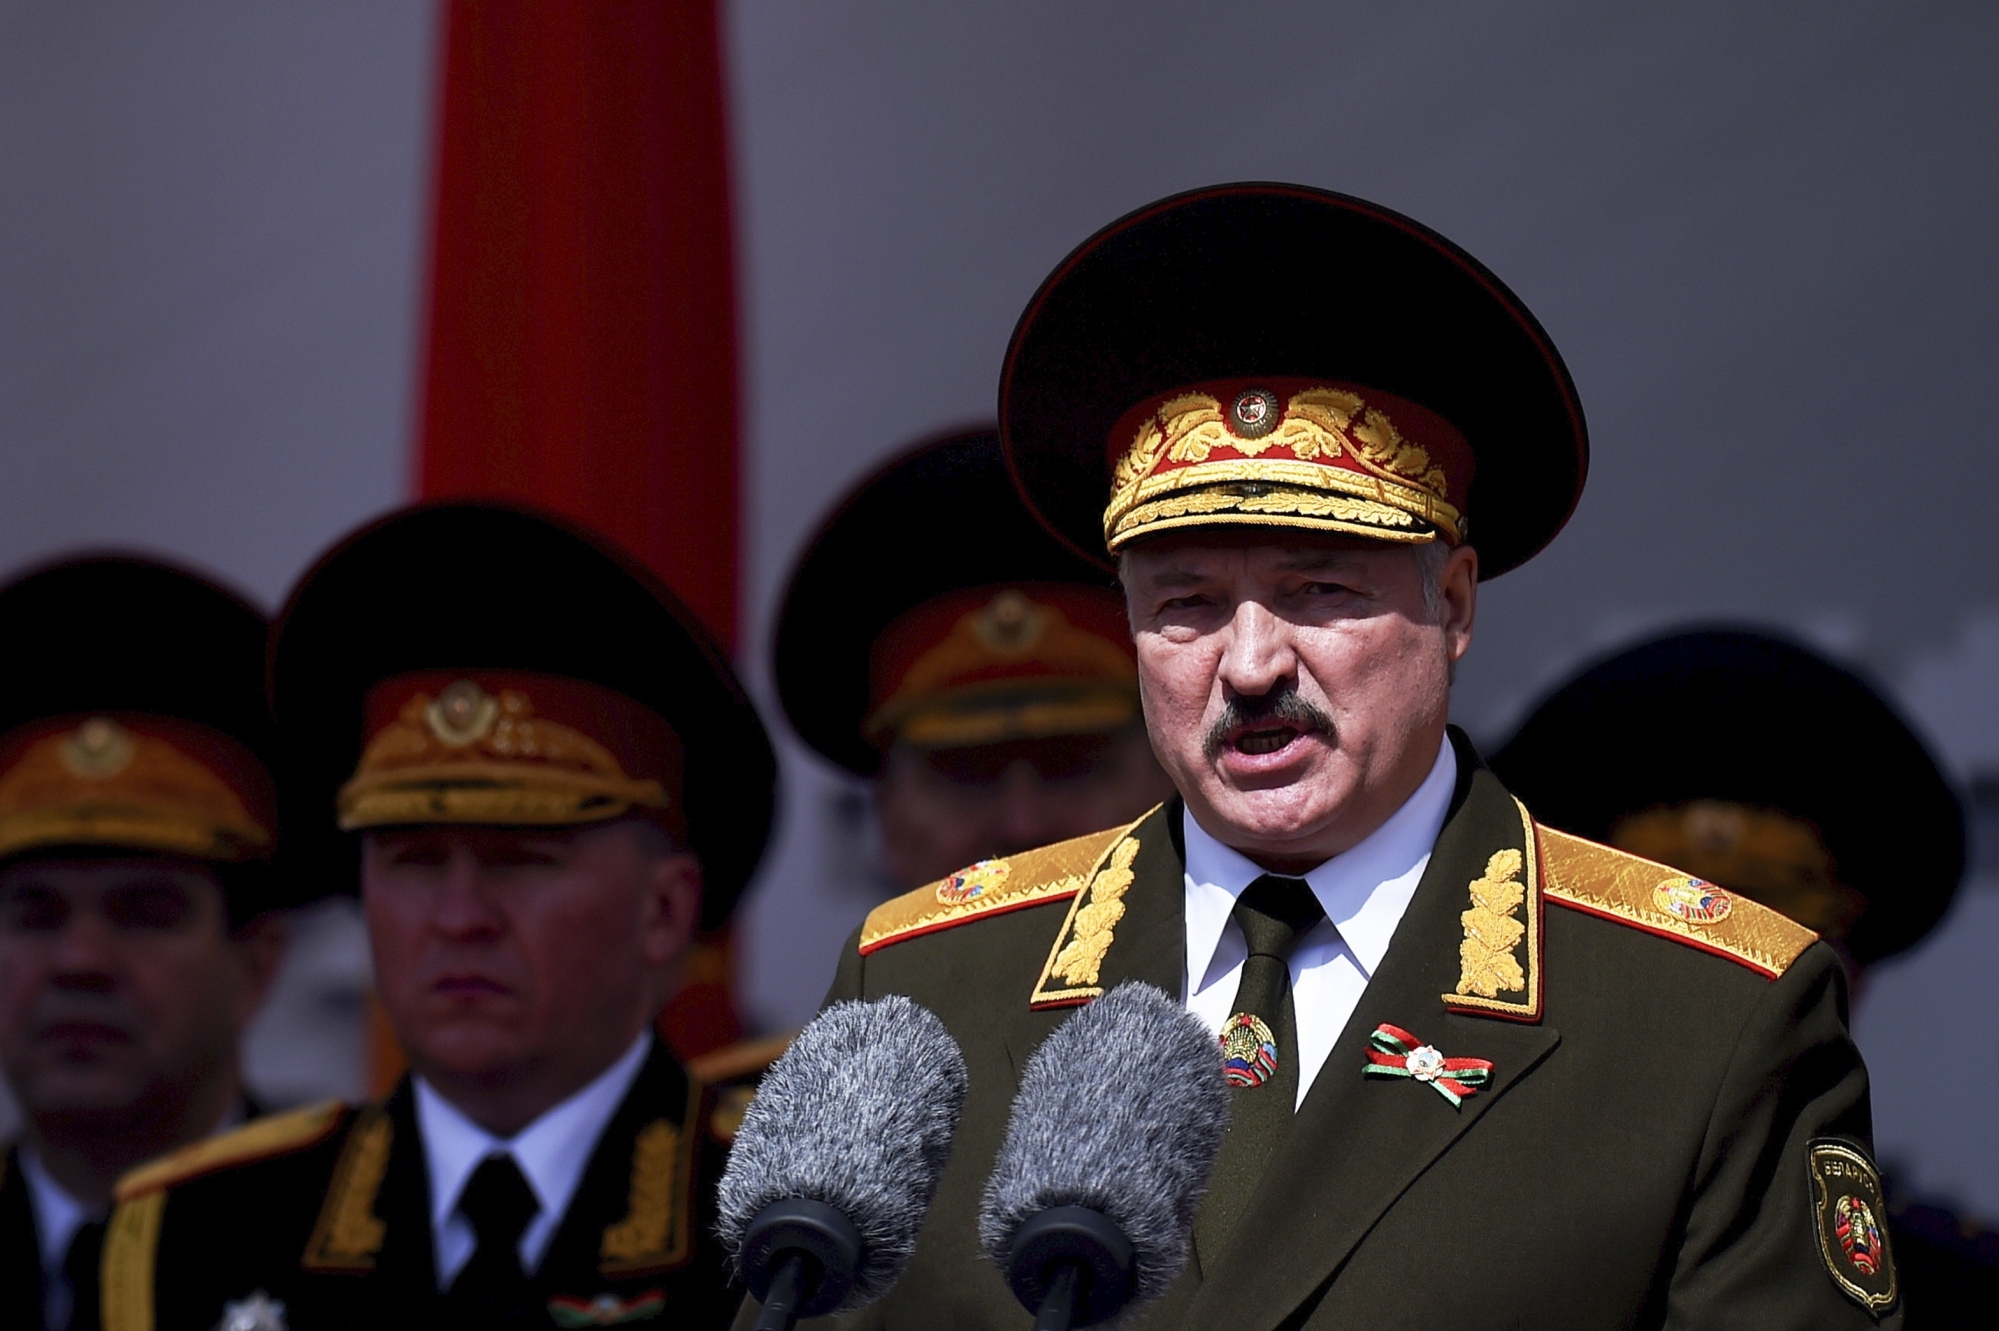 FILE In this file photo taken on Saturday, May 9, 2020, Lukashenko refused to impose any restrictions, making Belarus the only country in Europe to continue playing professional soccer games with fans in the stands while the outbreak was in full swing. Religious service and other mass gatherings went on unimpeded, and the nation had a massive military parade in May to mark the 75th anniversary of the Nazi defeat in World War II. (Sergei Gapon/Pool via AP, File) ArcInfo